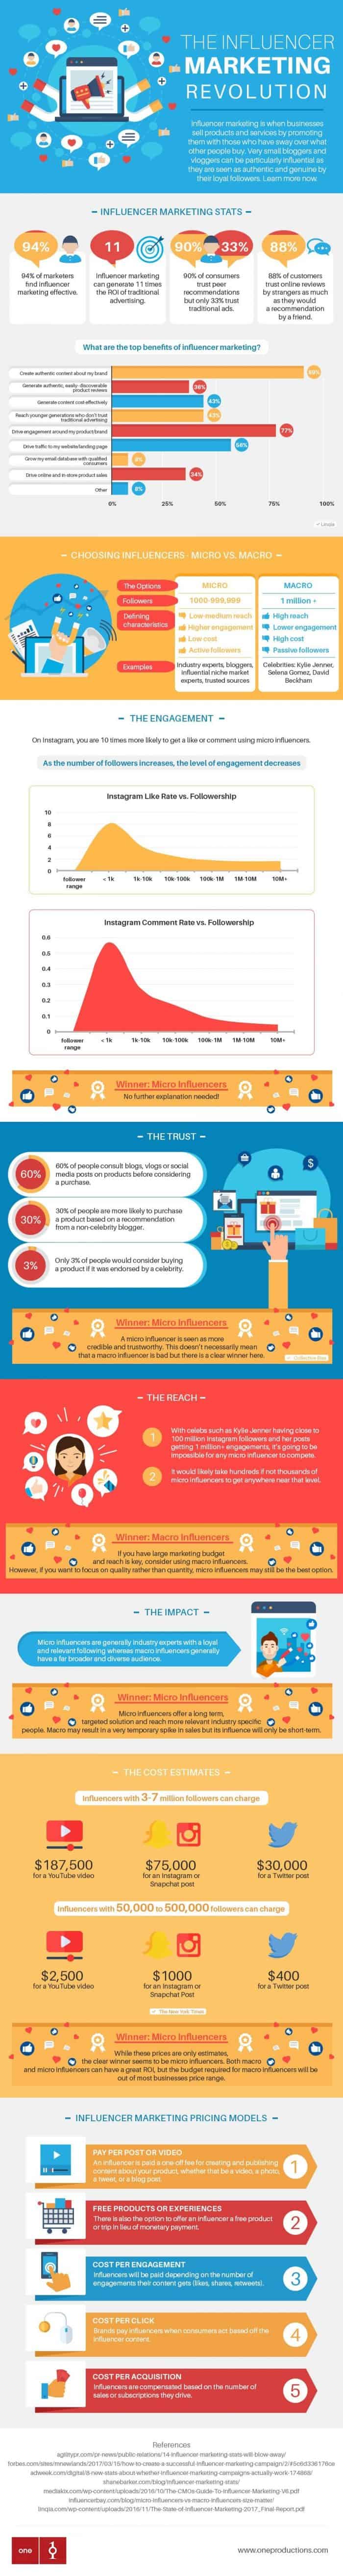 infographic describes influencer marketing industry and why it's valuable for companies